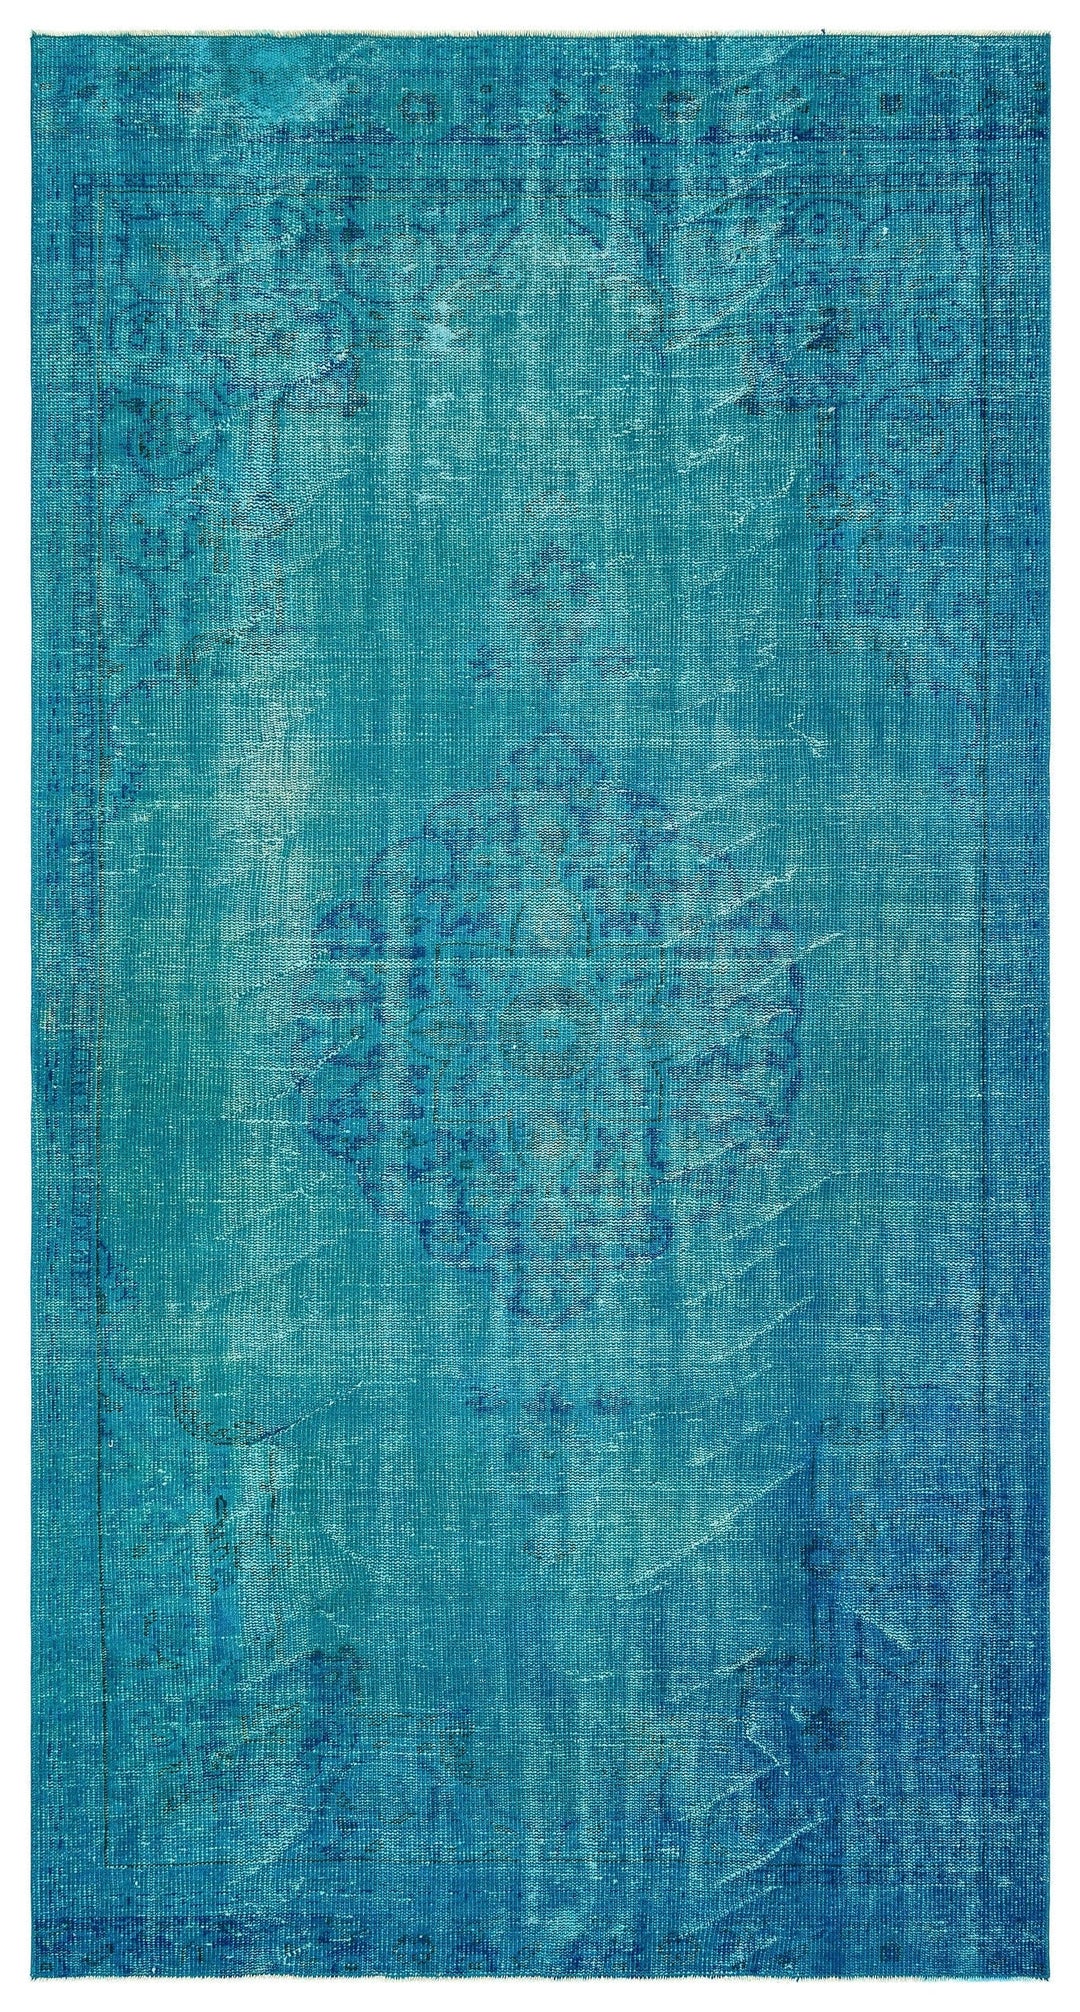 Athens Turquoise Tumbled Wool Hand Woven Carpet 165 x 311